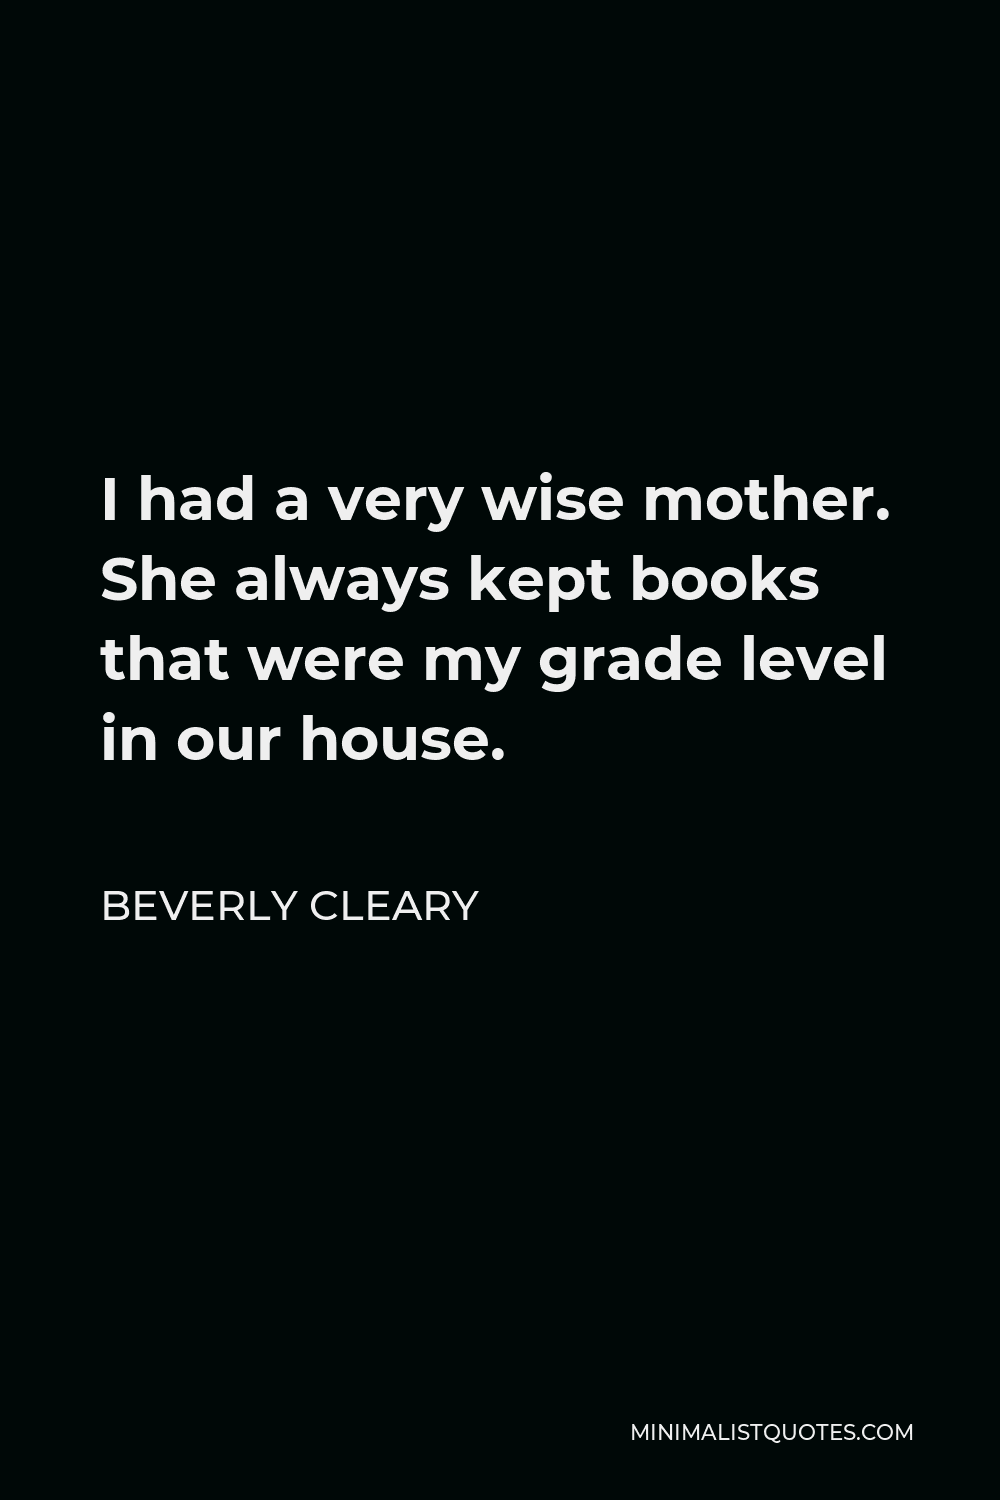 Beverly Cleary Quote - I had a very wise mother. She always kept books that were my grade level in our house.